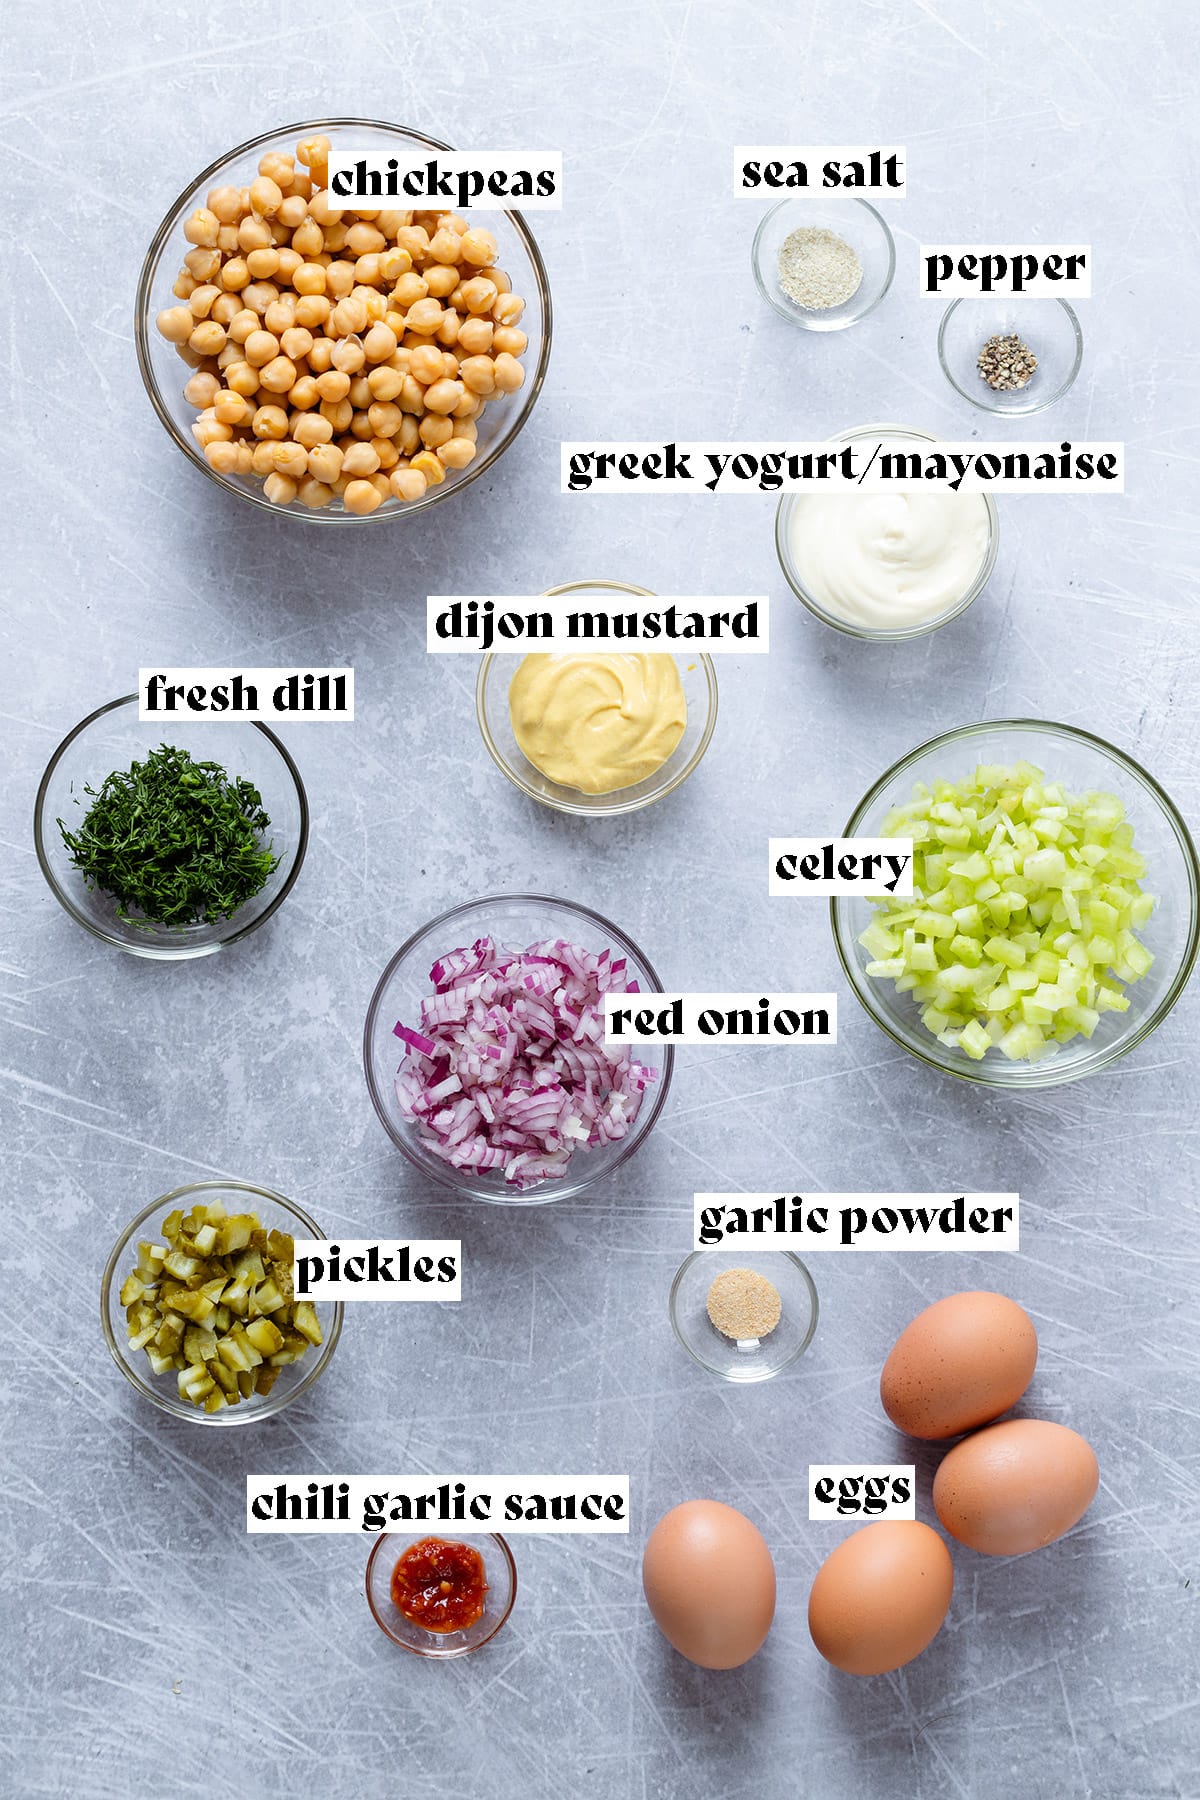 Chickpeas, eggs, celery and other ingredients for a chickpea egg salad sandwich ingredients laid out on a grey background.